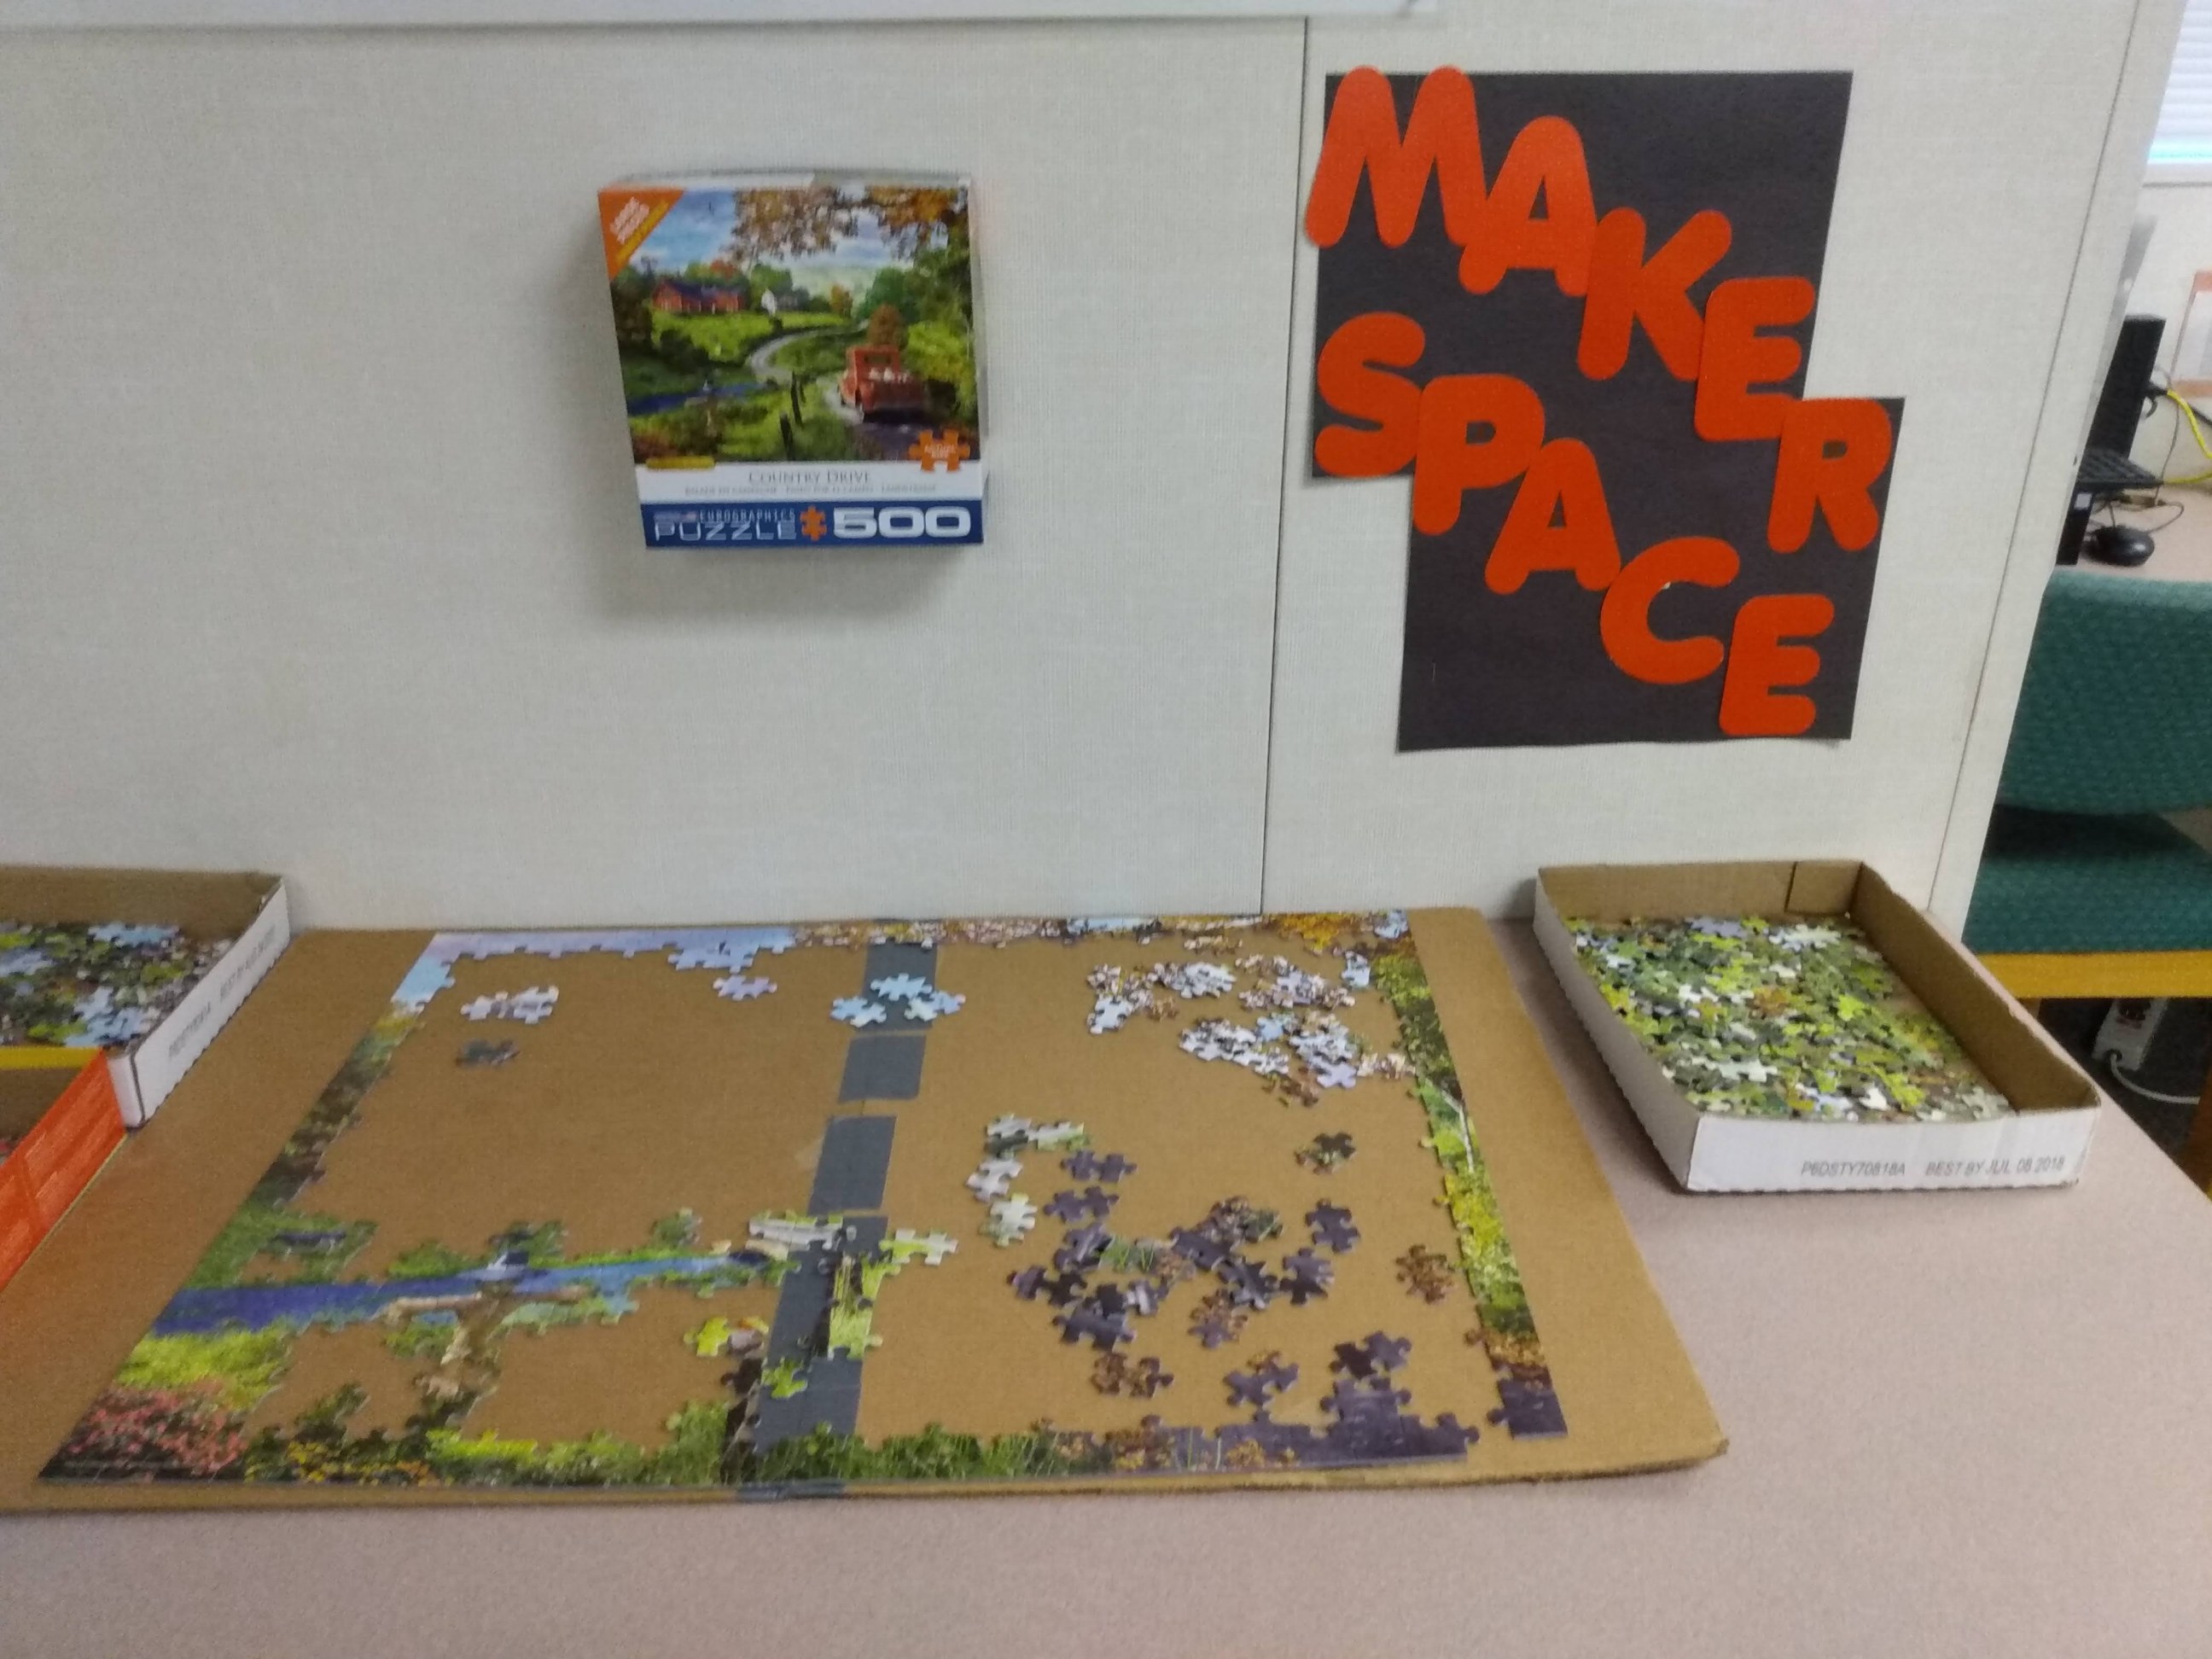 Incomplete puzzle on table from Maker Space